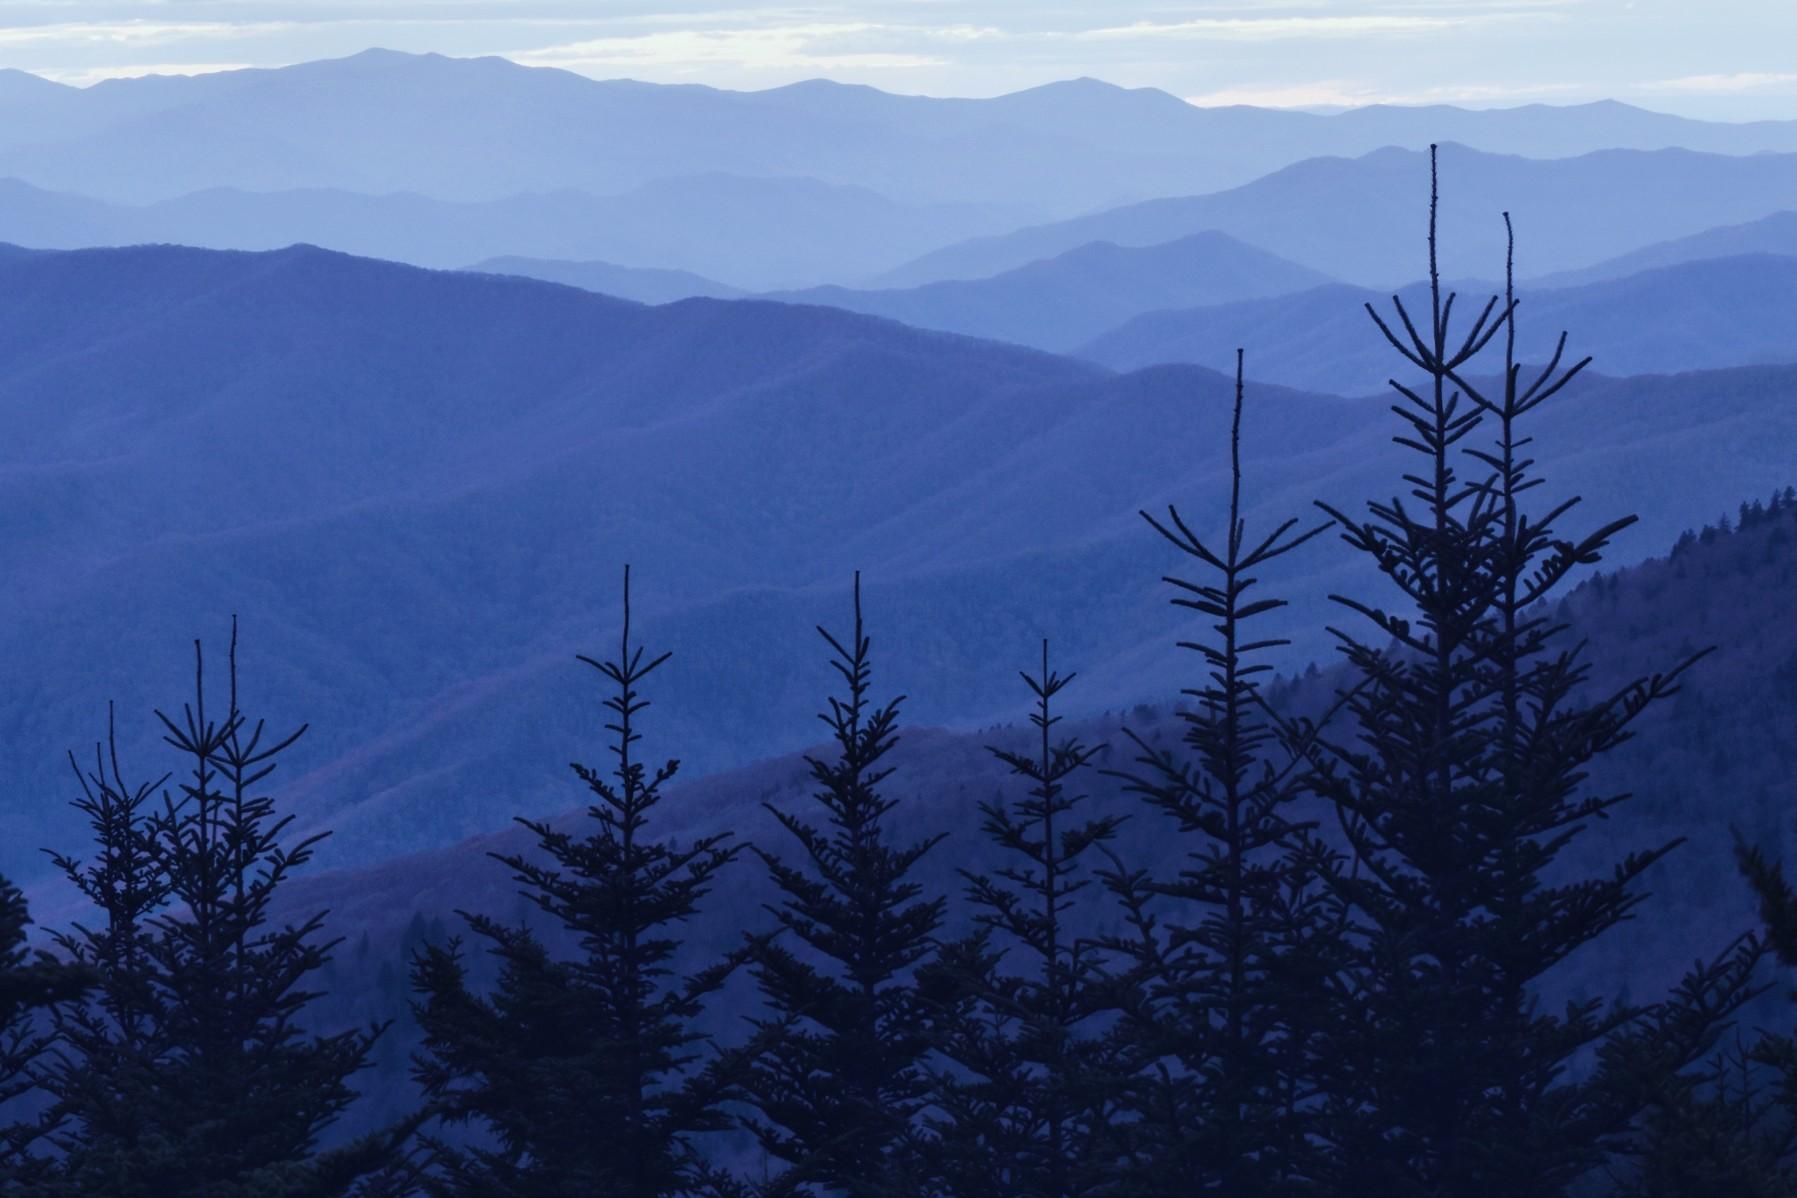 The view of the Great Smoky Mountains National Park in Tennessee.